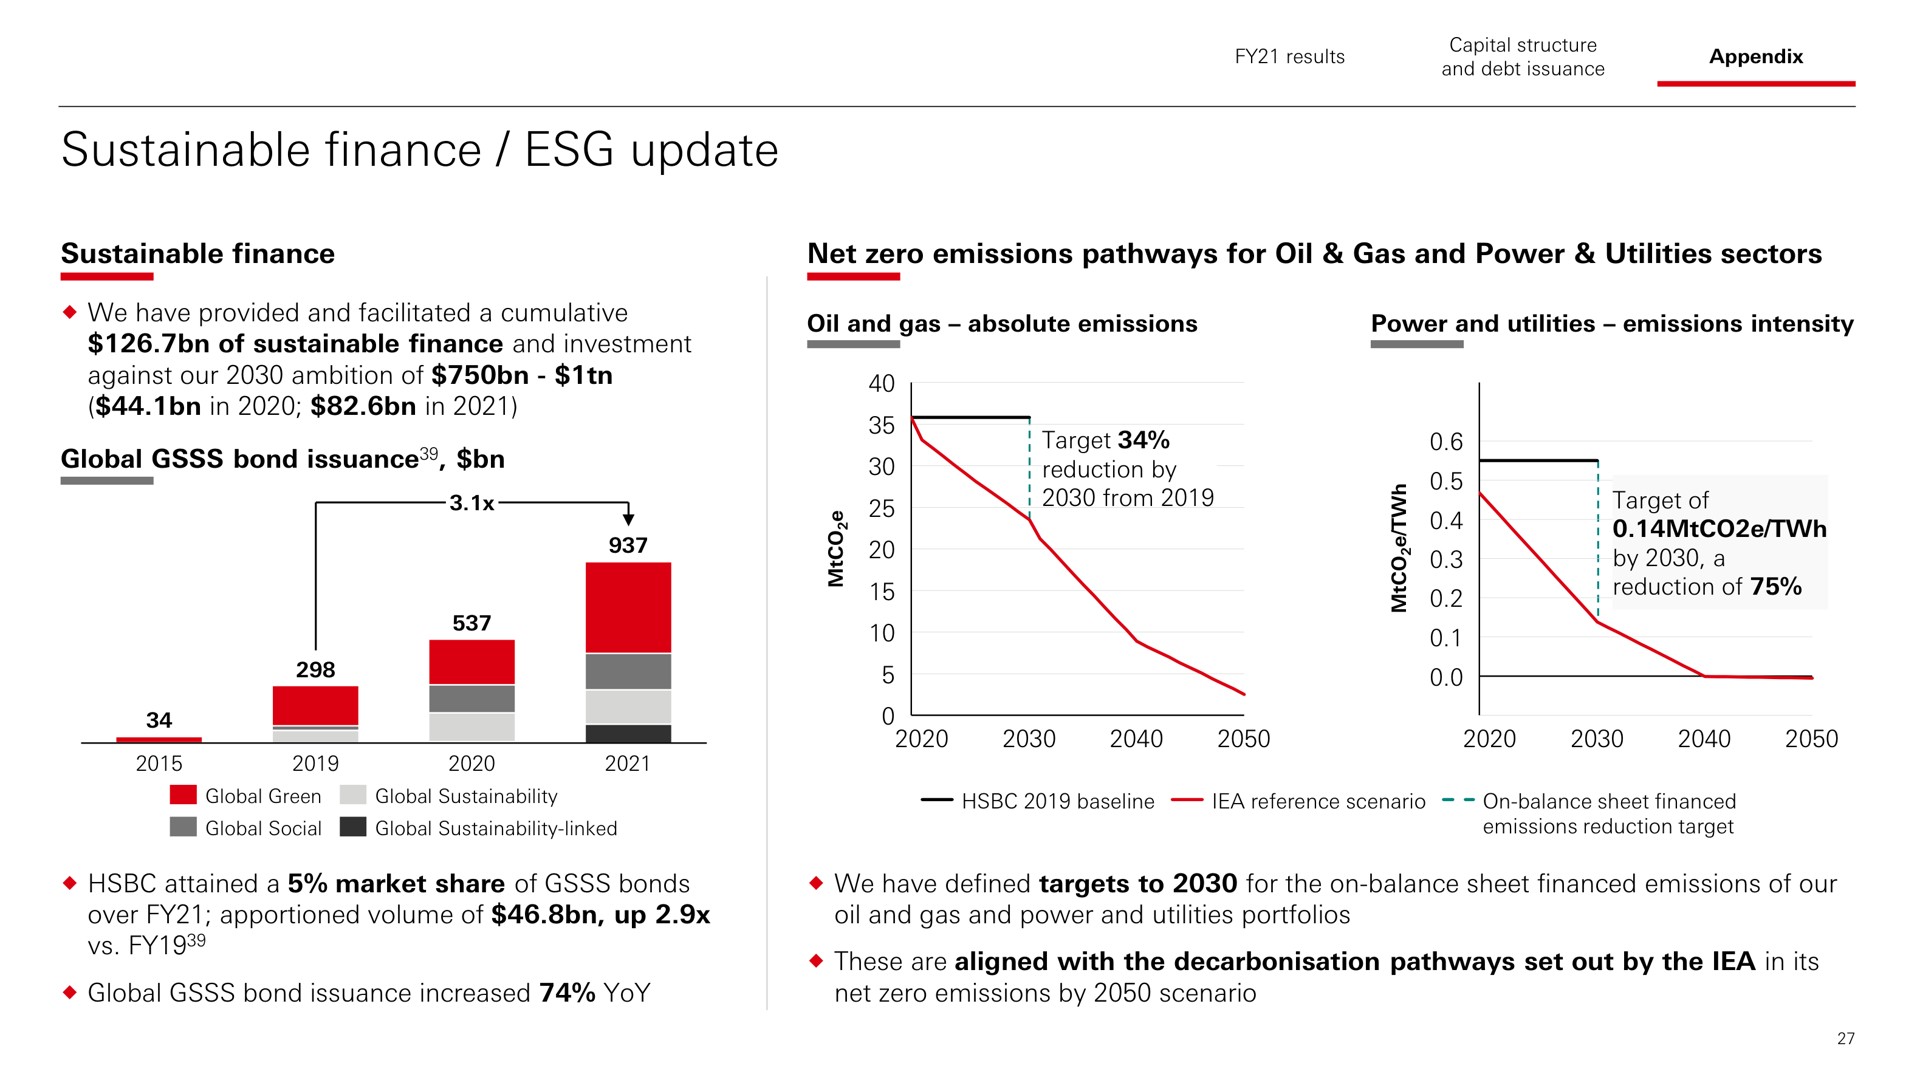 sustainable finance update sustainable finance net zero emissions pathways for oil gas and power utilities sectors from target of by a | HSBC